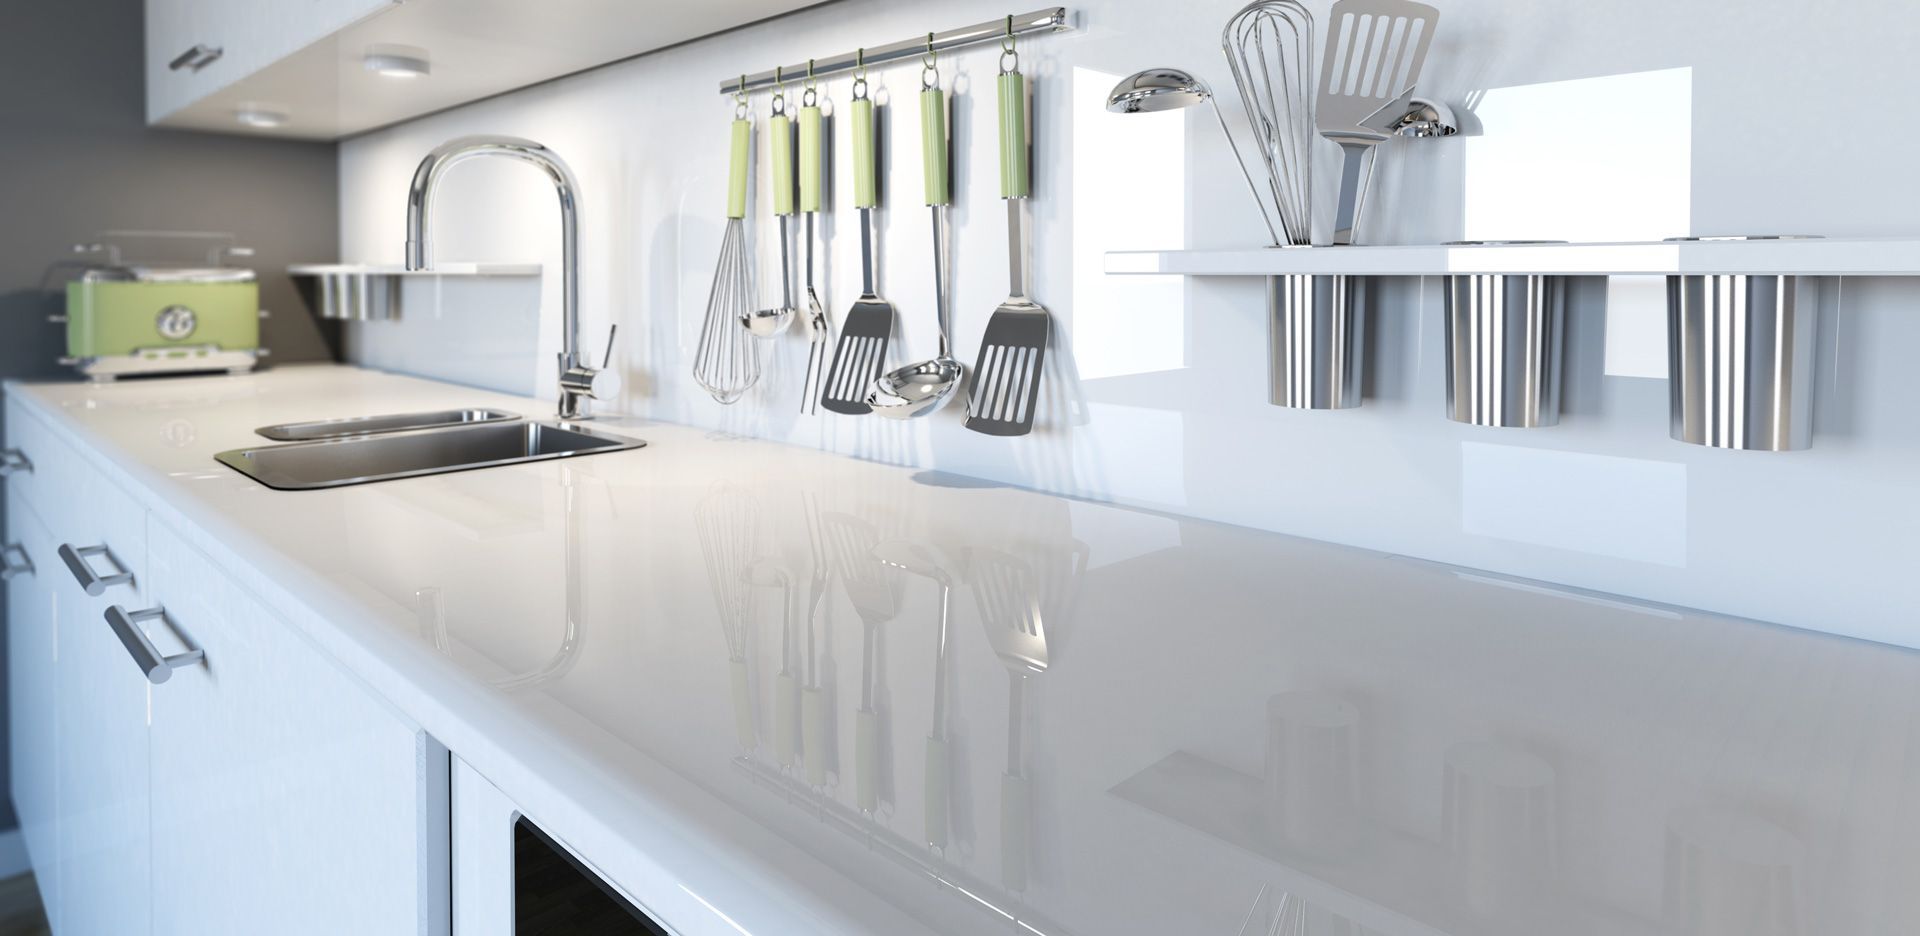 A kitchen with white cabinets , a sink , and utensils hanging on the wall.